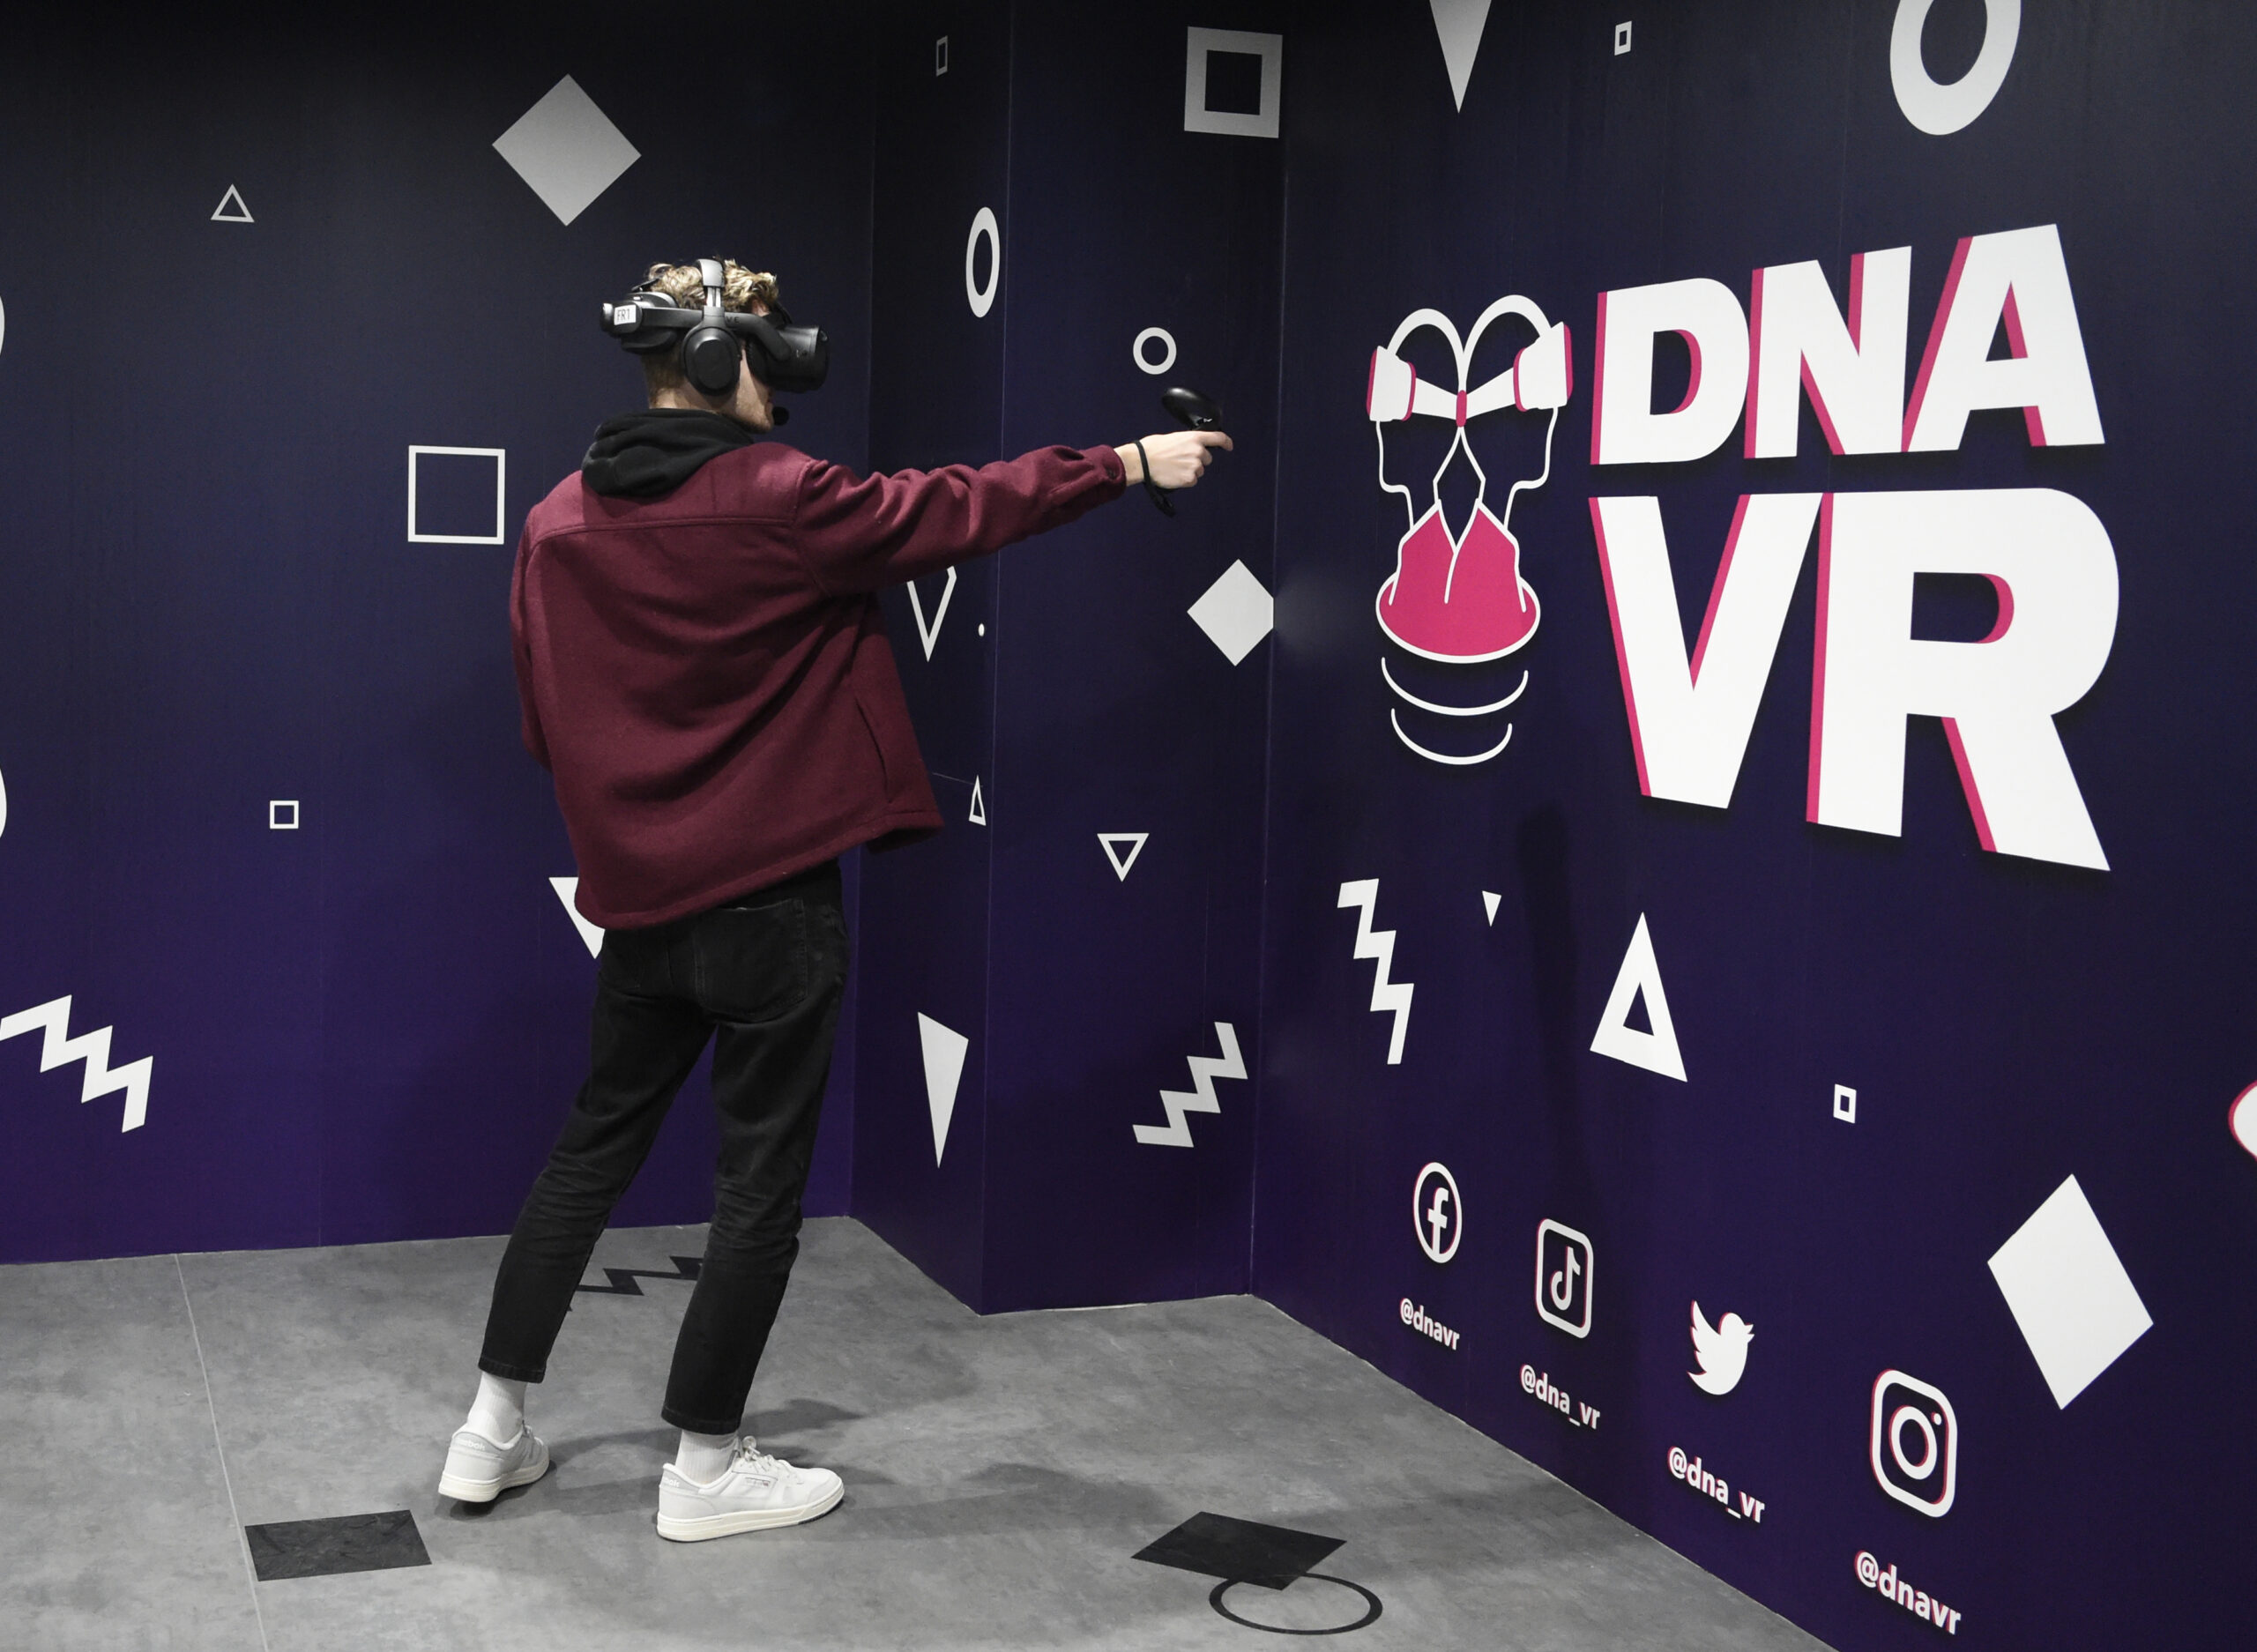 DNA VR, has a discount throughout the May half term